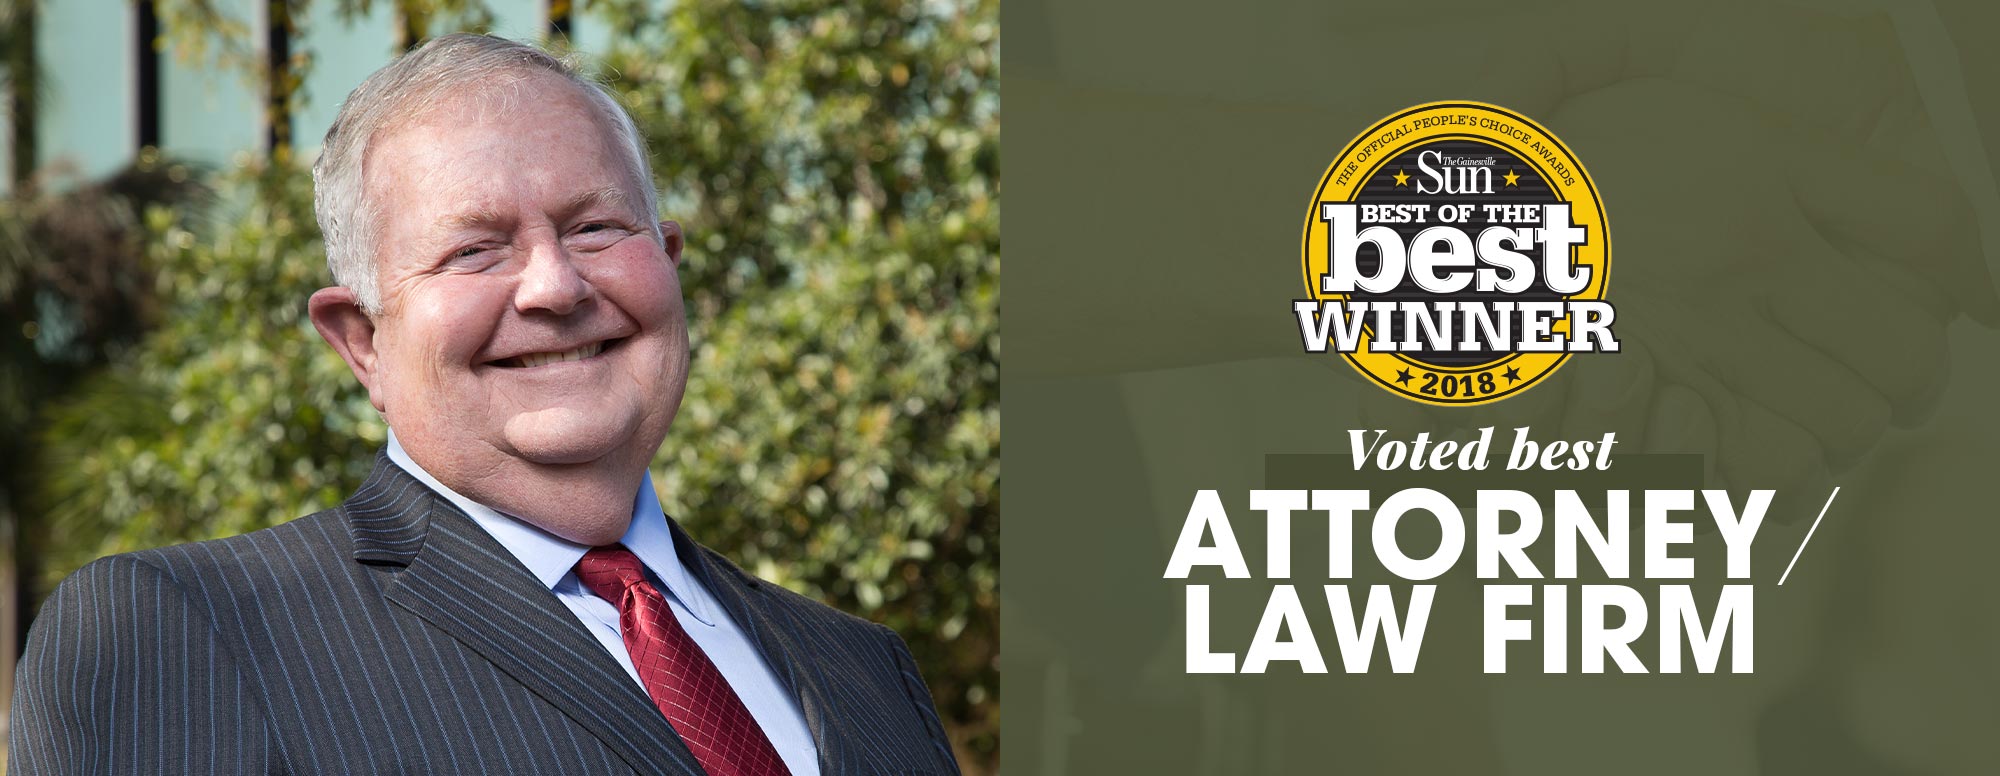 Voted Best Gainesville Attorney / Law Firm - Family Law, Business Law, Estate Planning, Probat and Civil Appeals